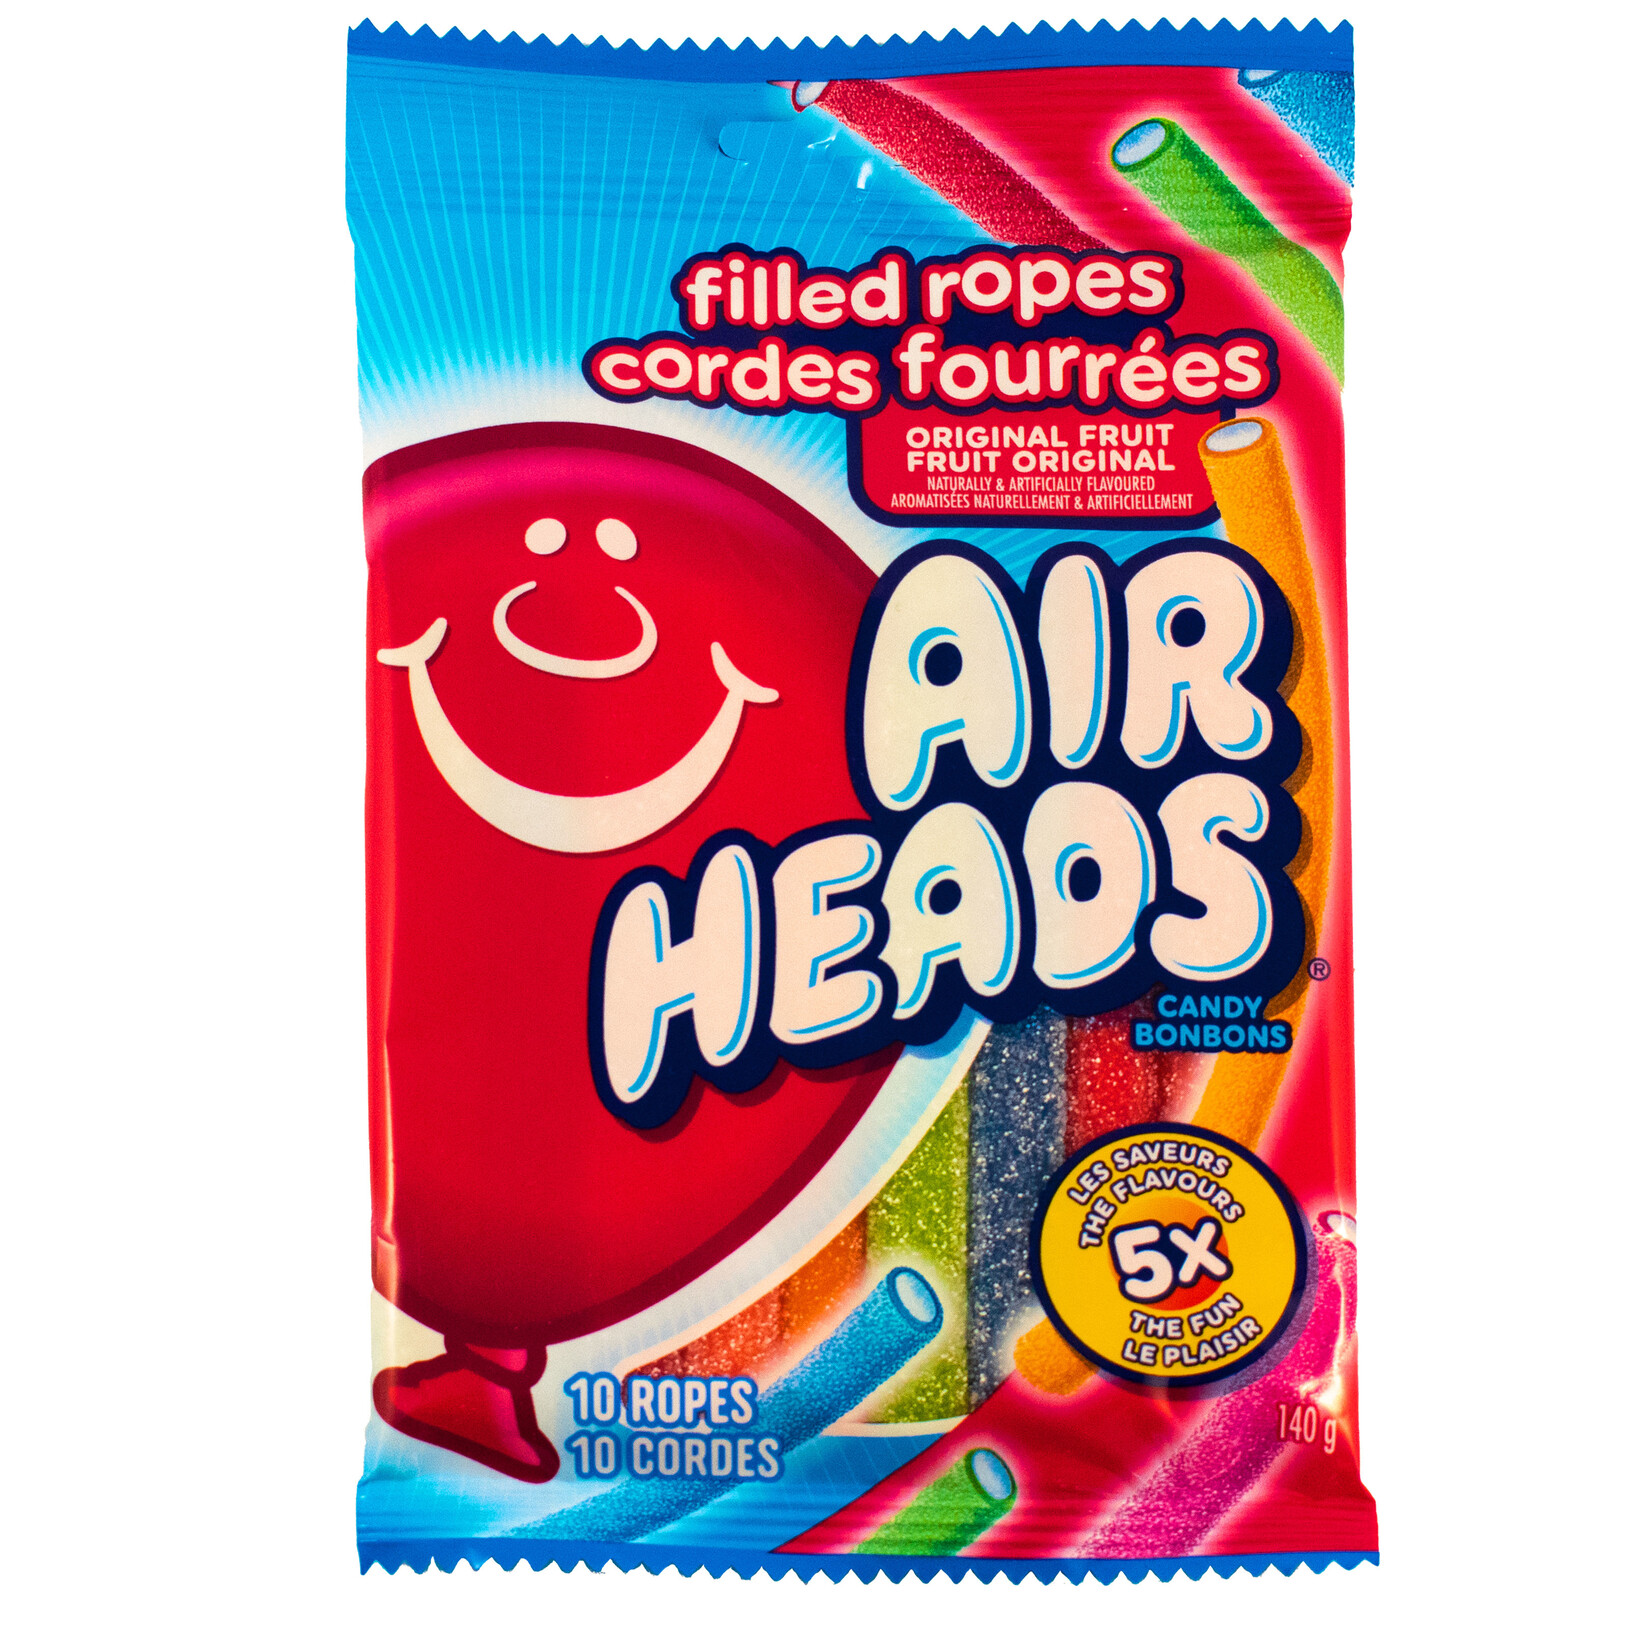 Airheads Air Heads filled ropes 140g